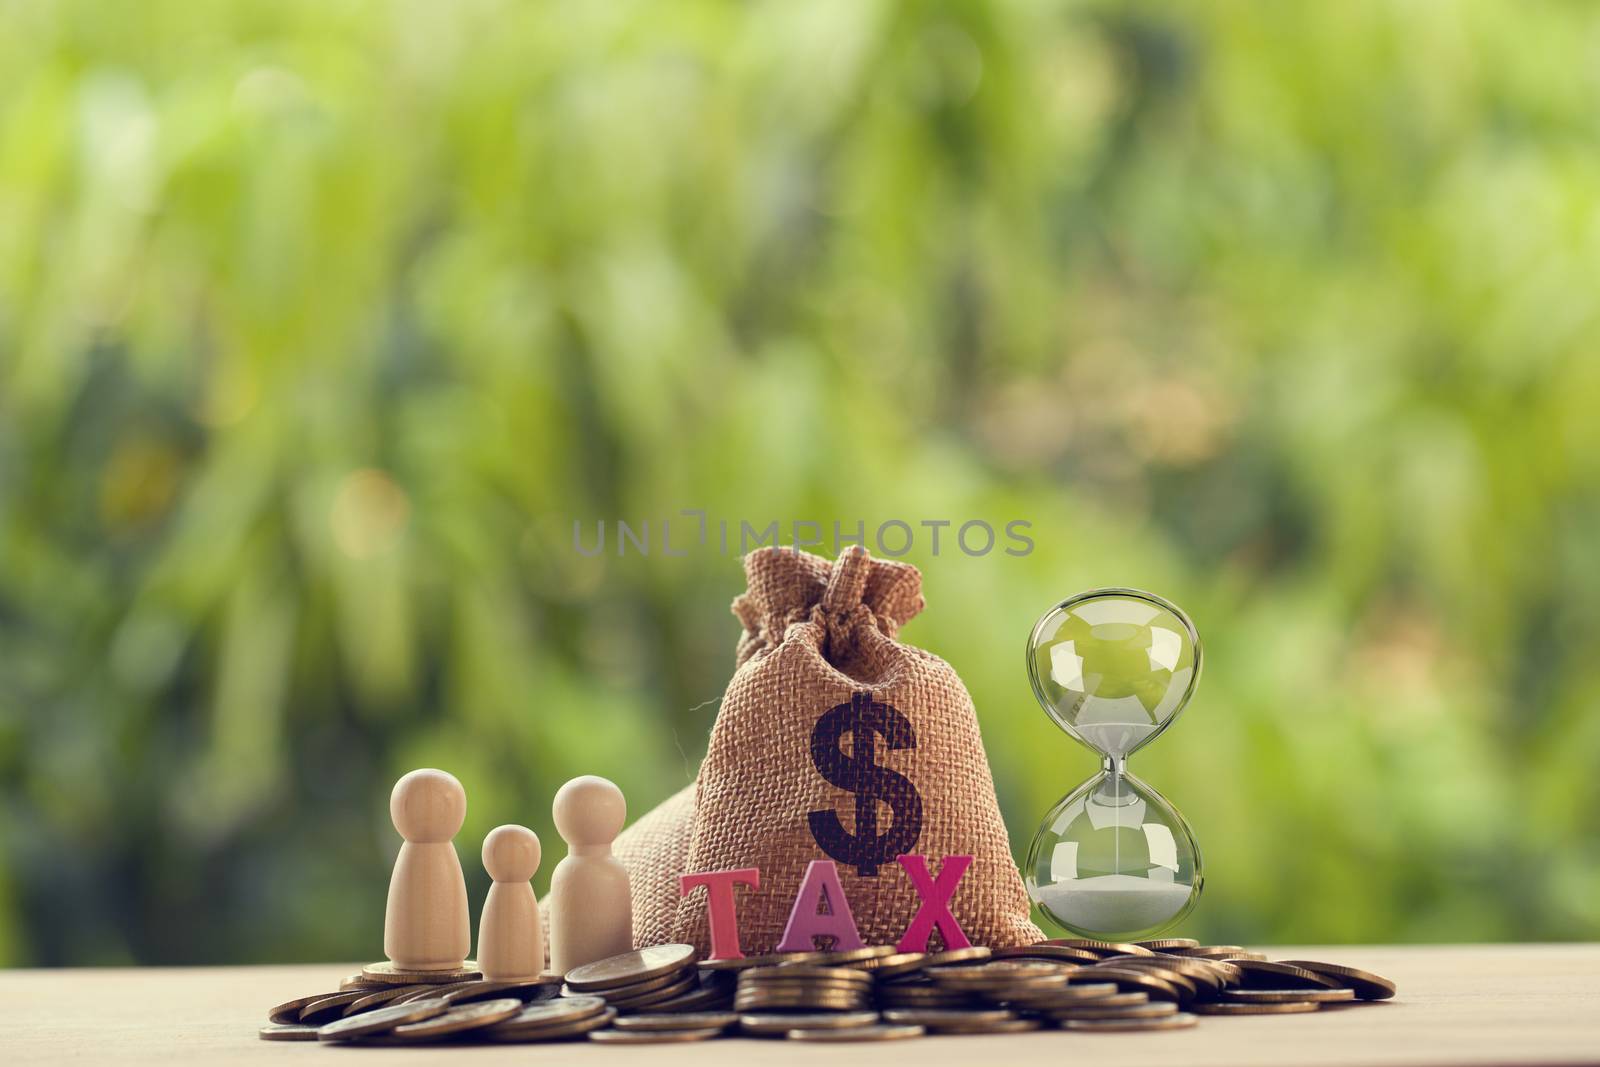 Family members, words tax, hourglass, US money bags on a pile of coins. Family tax benefit, property tax concept: depicts time and income management for future security